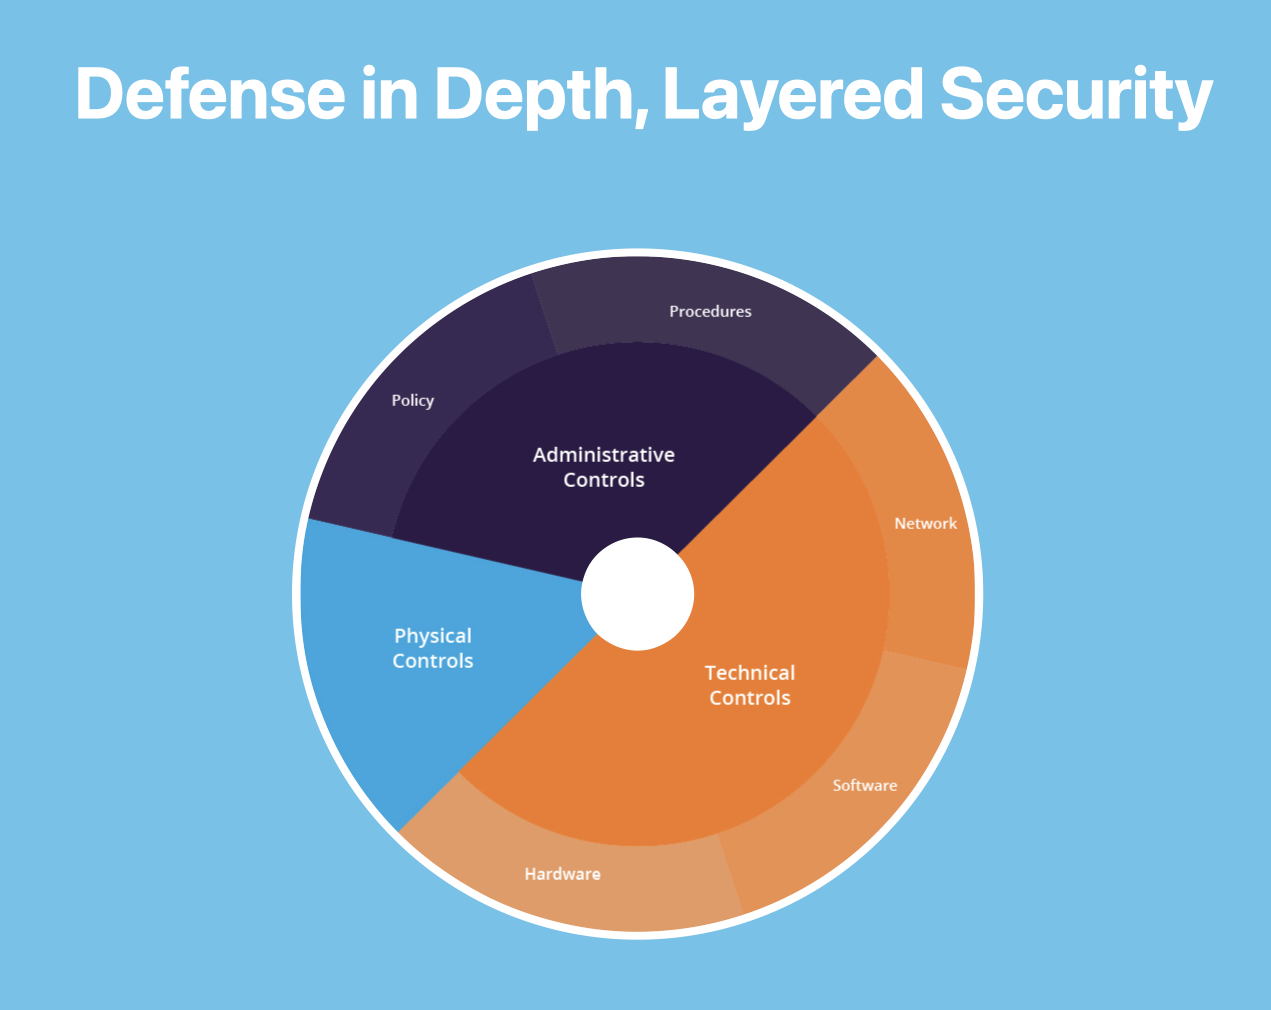 Defense in Depth, Layered Security